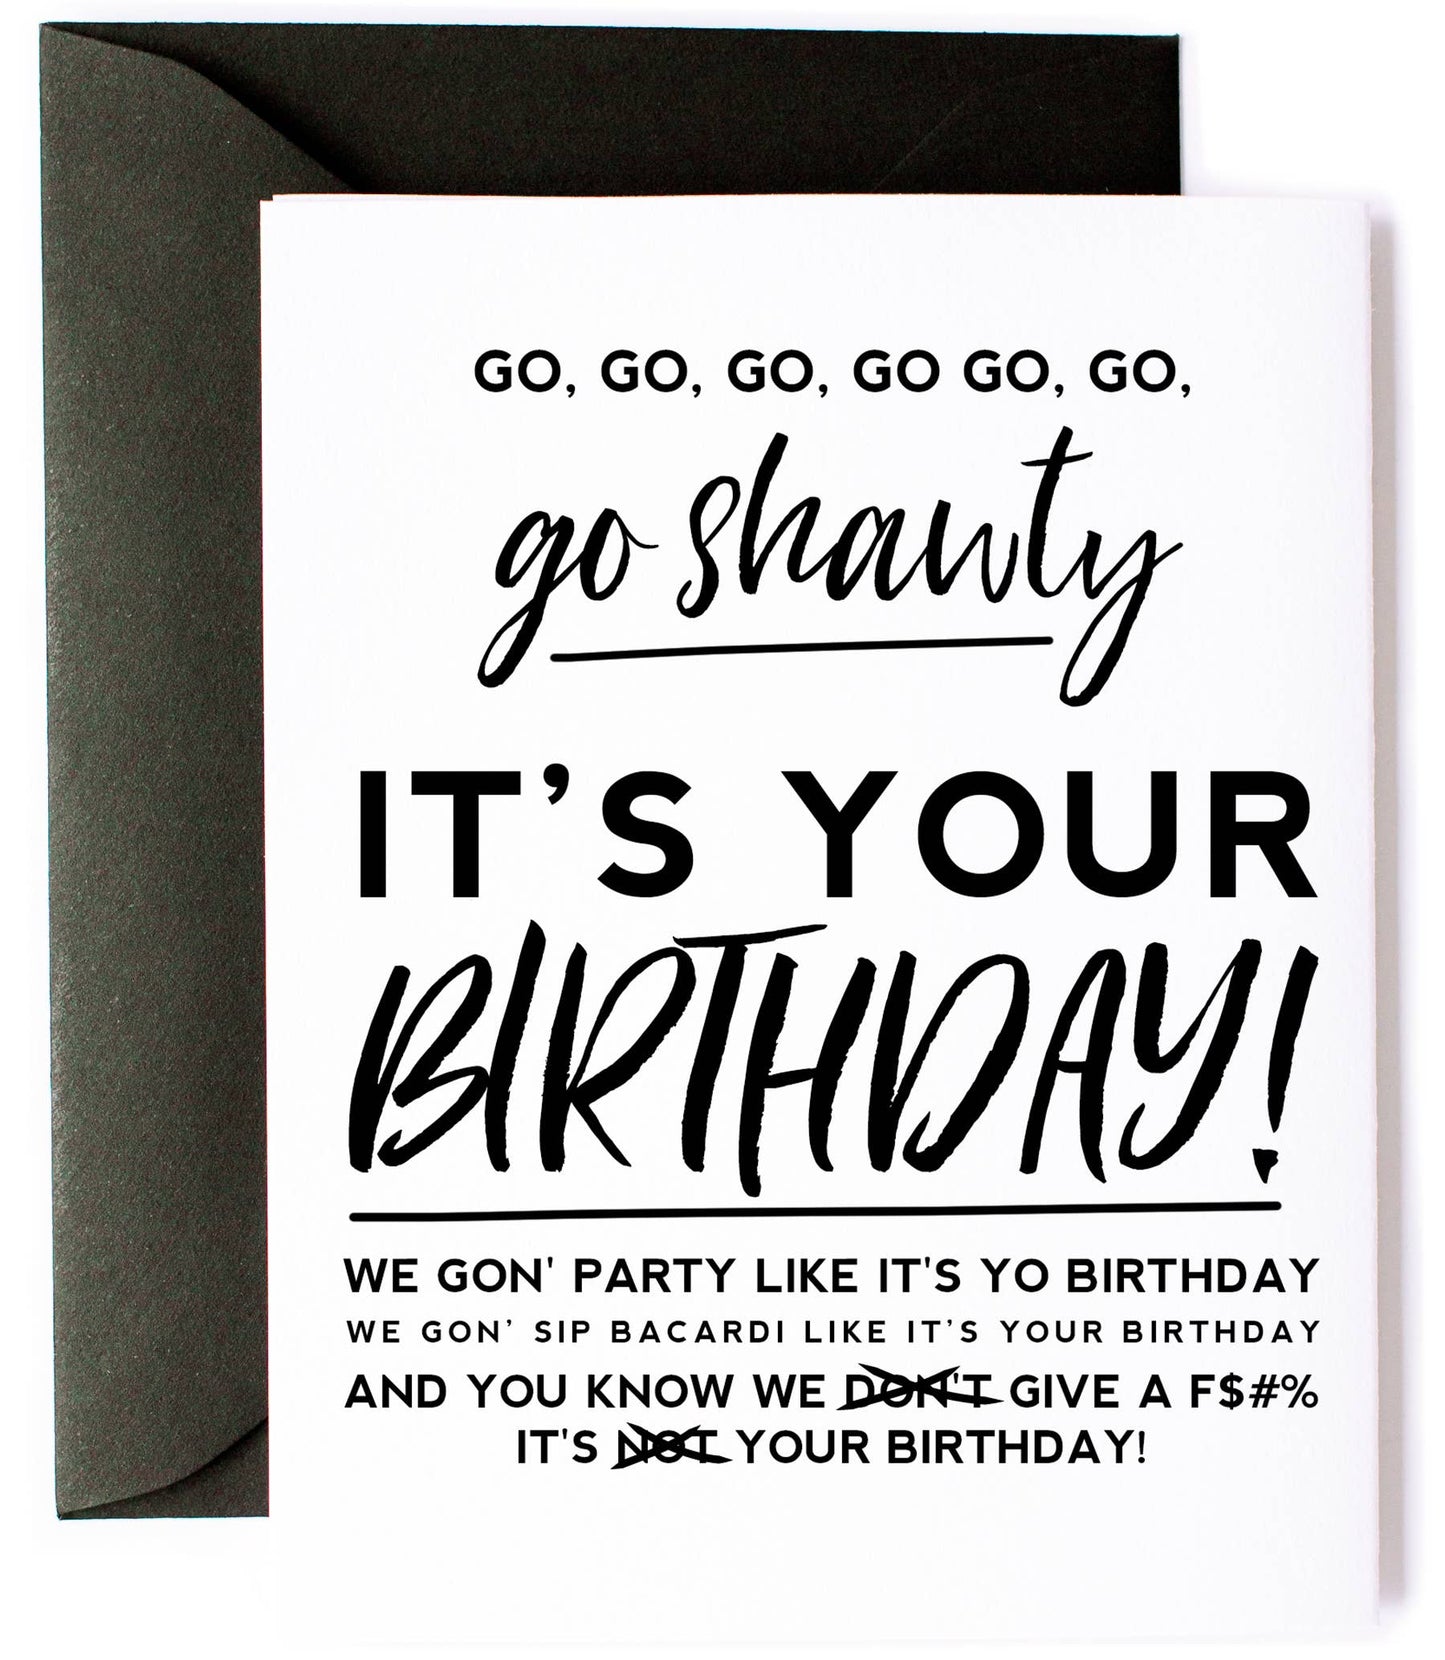 Kitty Meow Boutique - 50 Cent Party Like It's Your Birthday Card